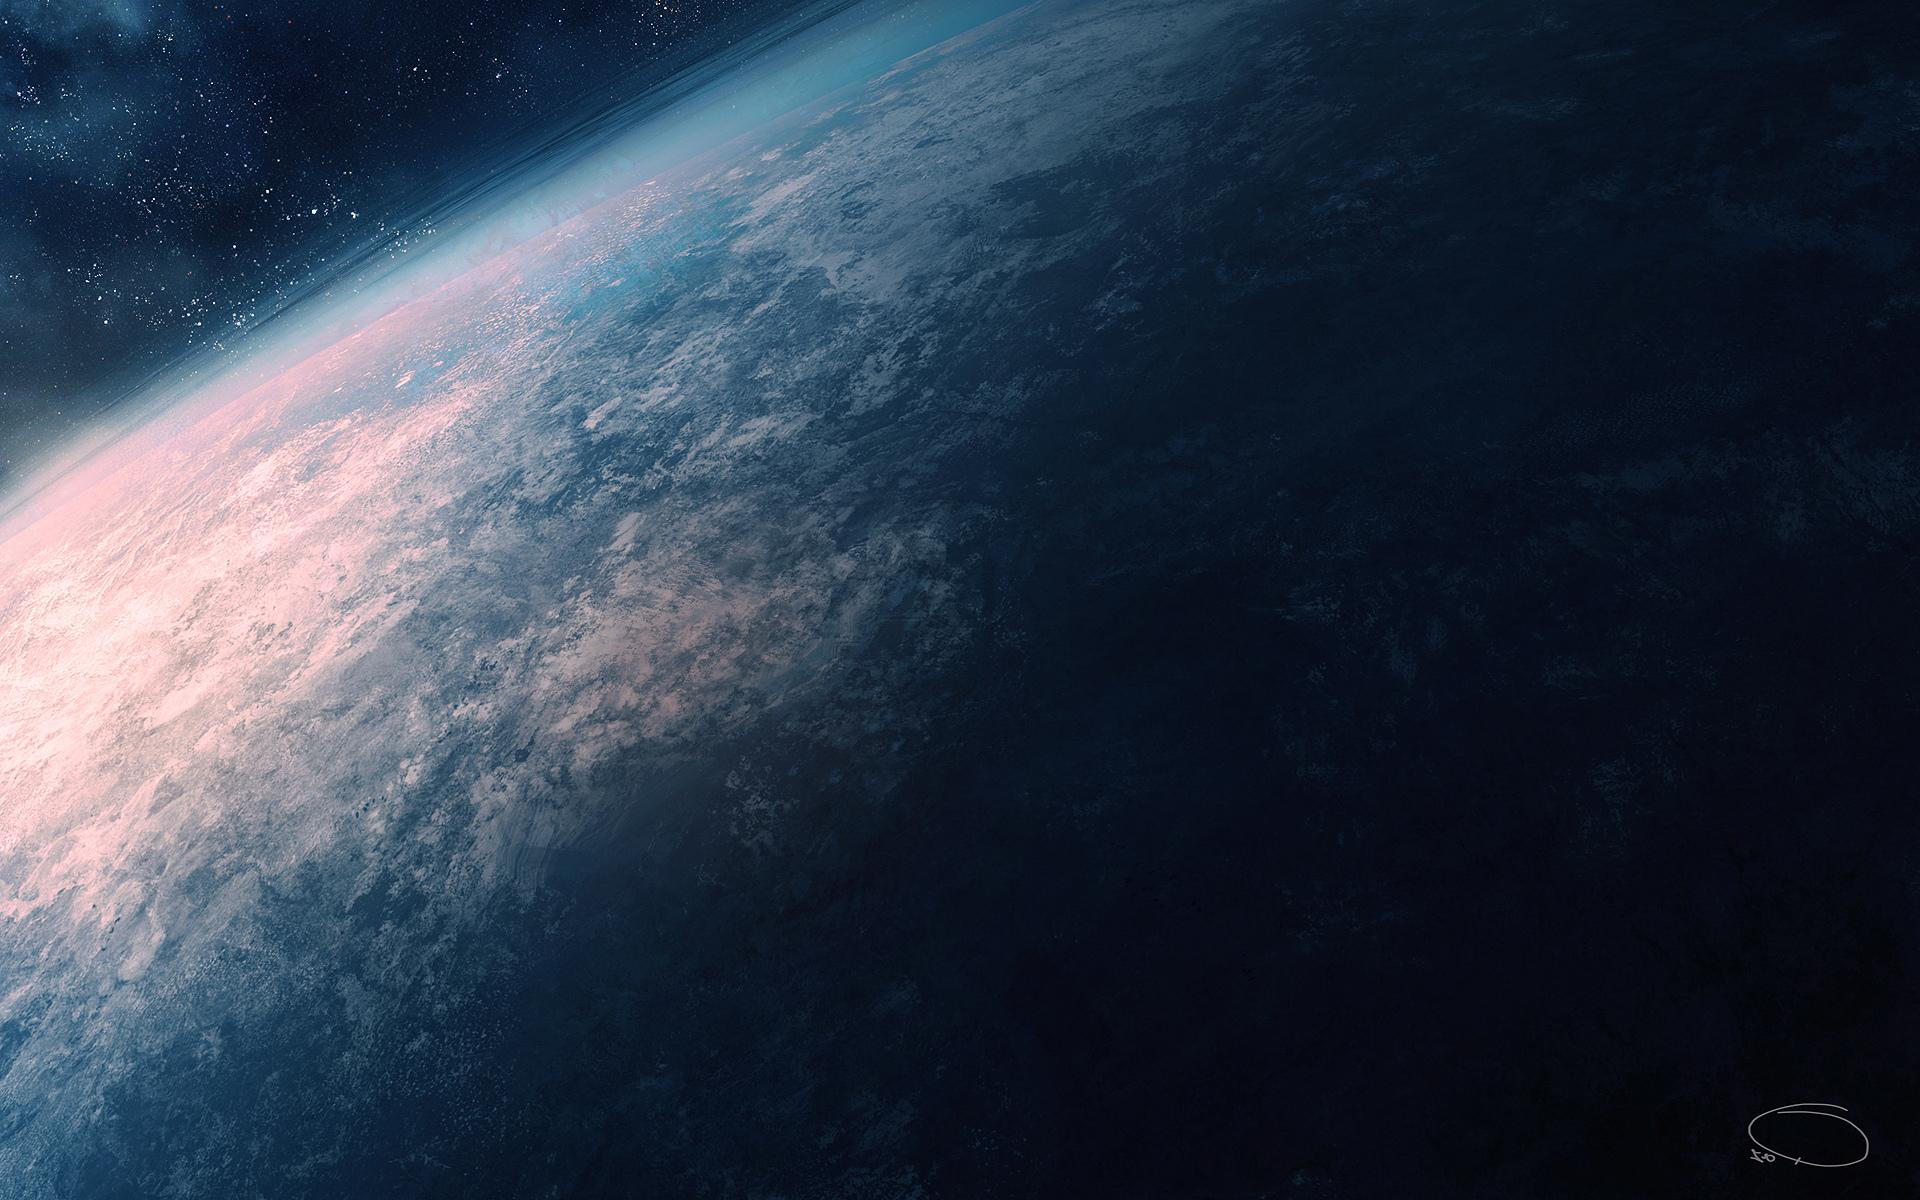 Looking Earth On Space Wallpaper